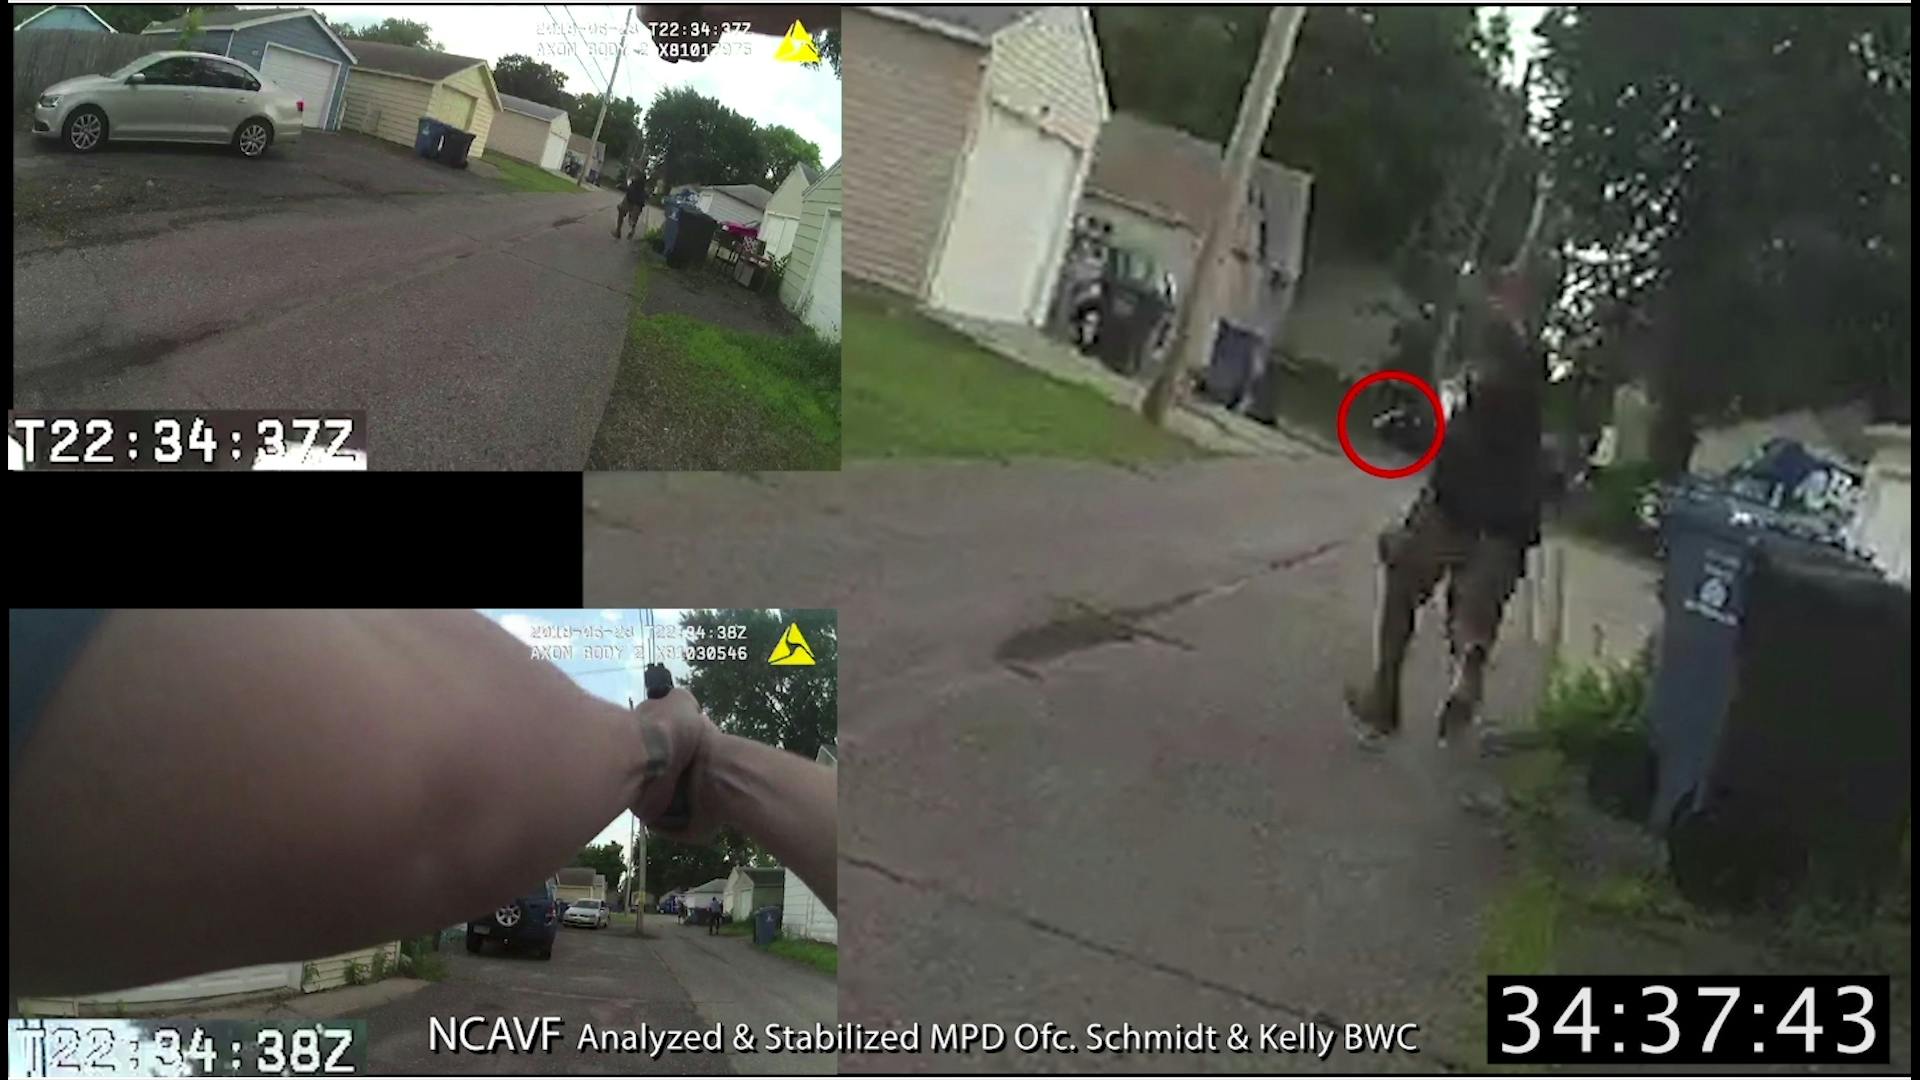 The 31-year-old was shot by officers five weeks ago after a 911 caller reported a man shooting a gun in the air and into the ground. The video appears to show a gun in Blevins' hand shortly before shots were fired.